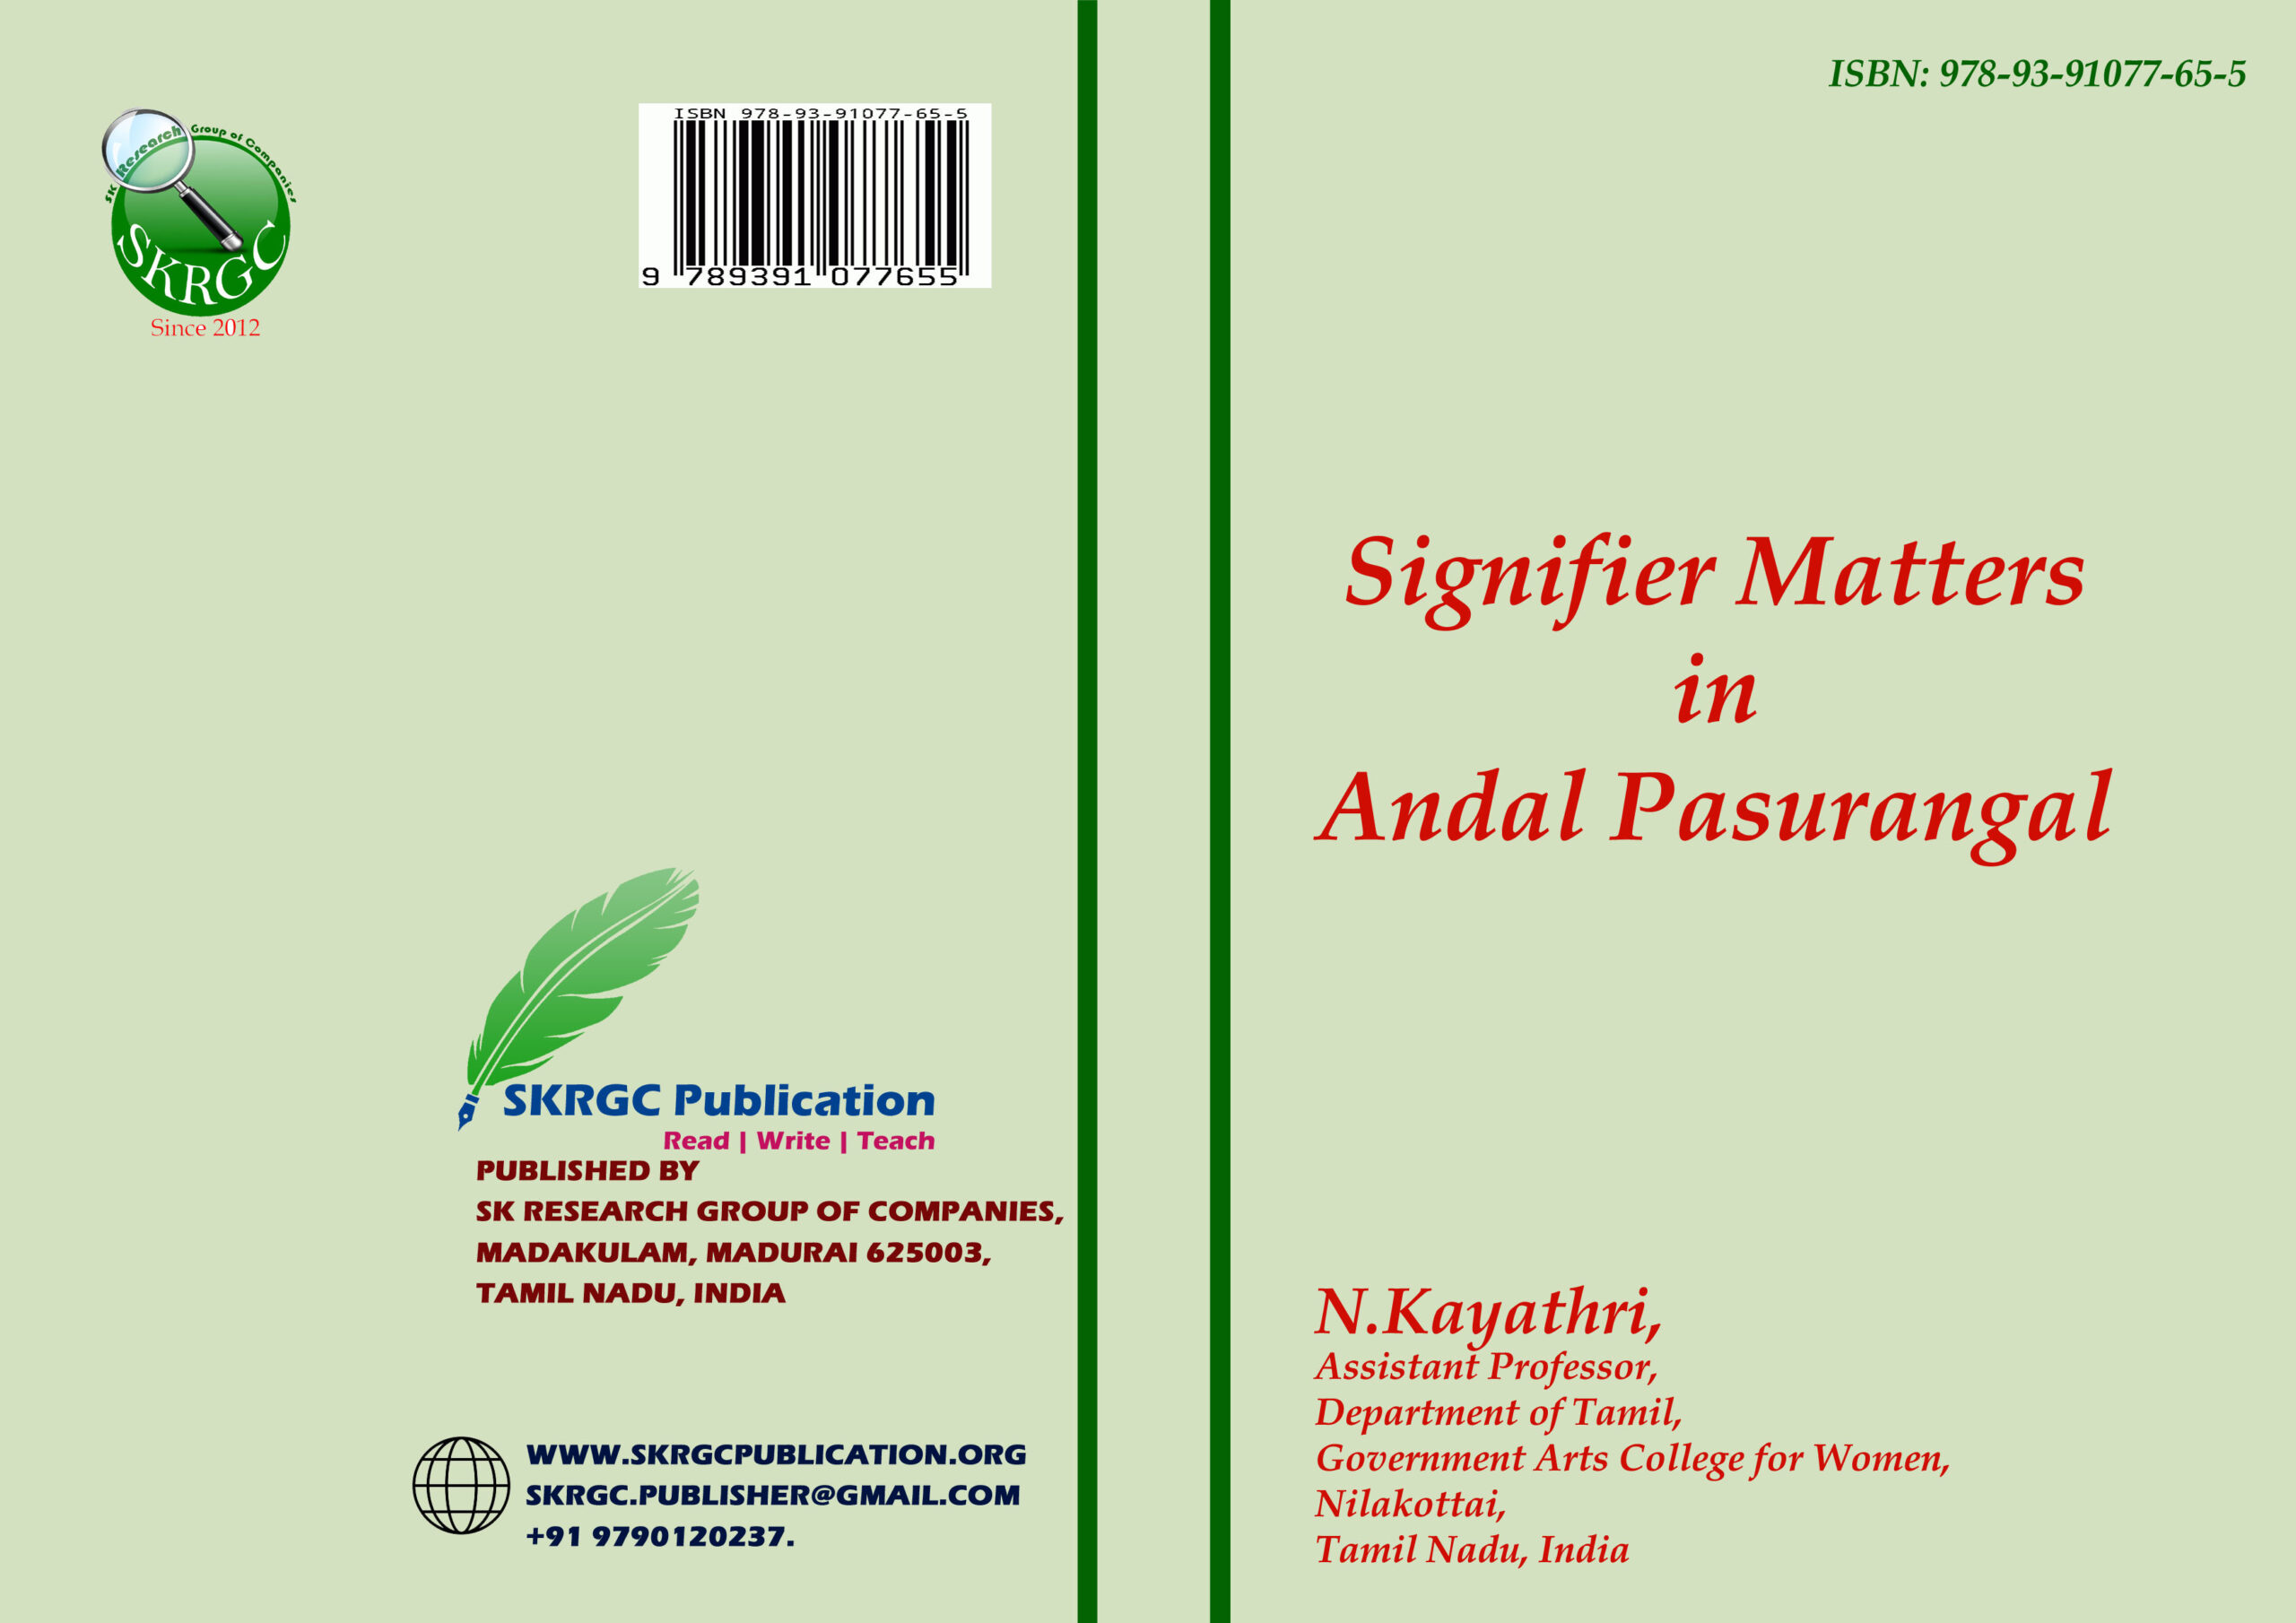 Signifier Matters in Andal Pasurangal